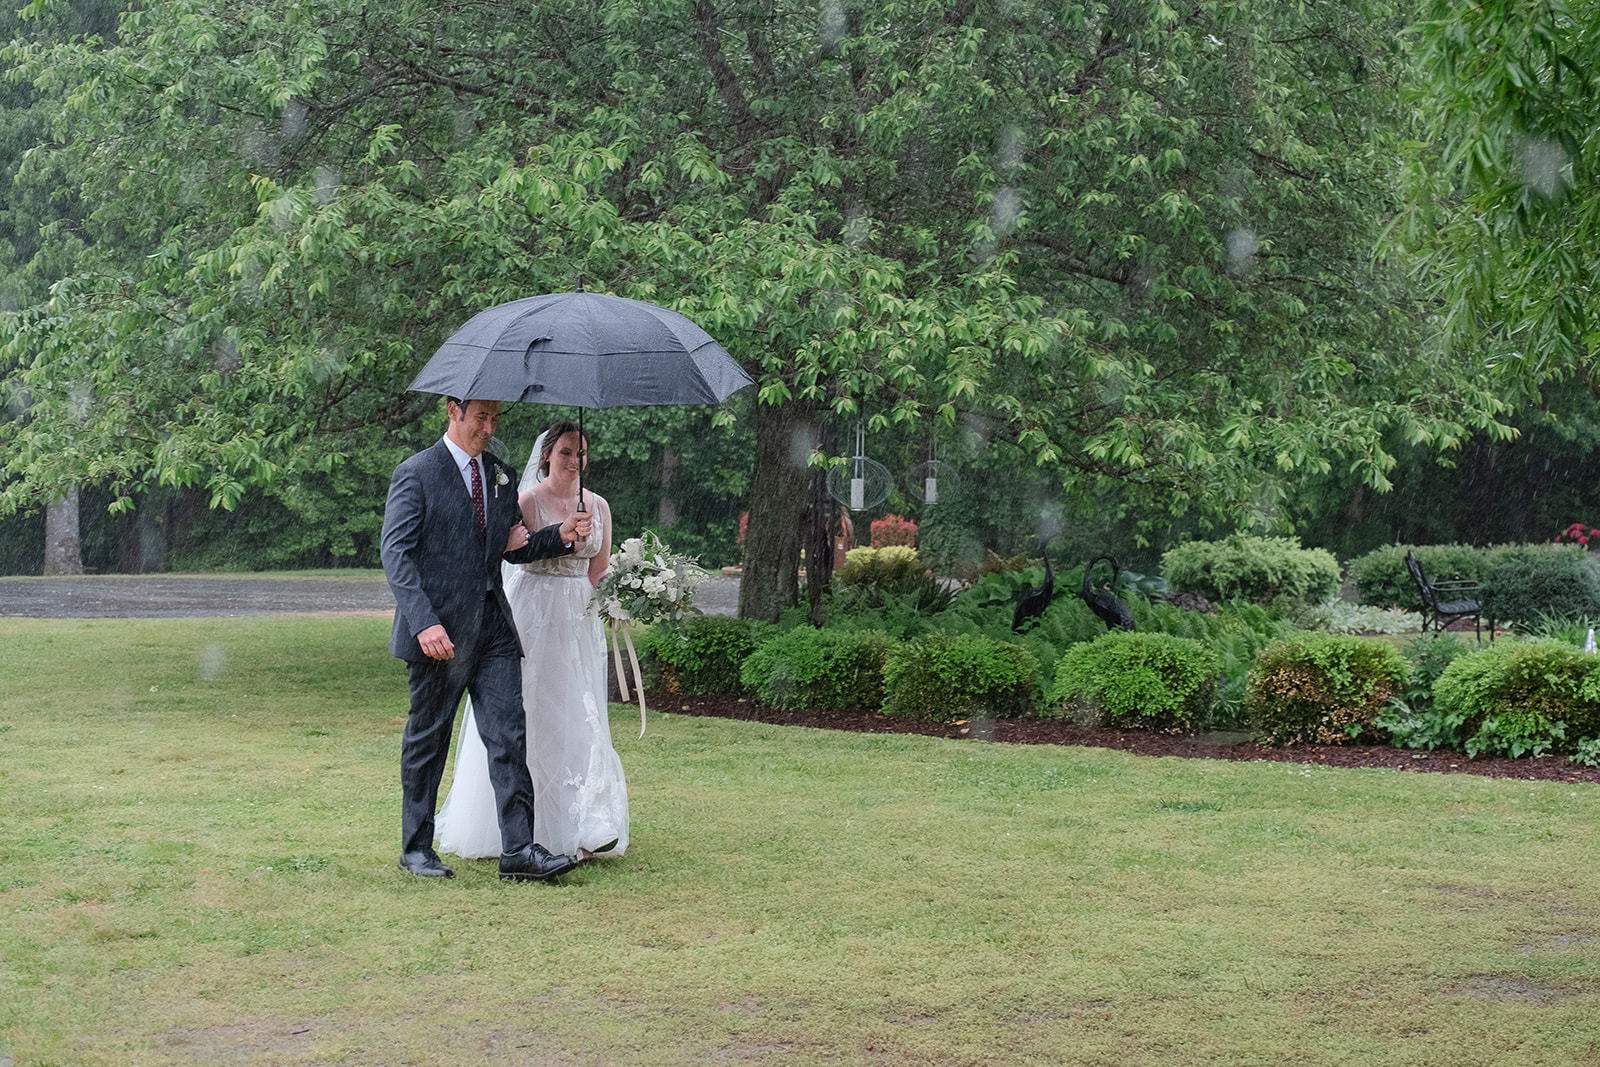 Oliver & Jess were married on a day that poured rain in Milton, DE.